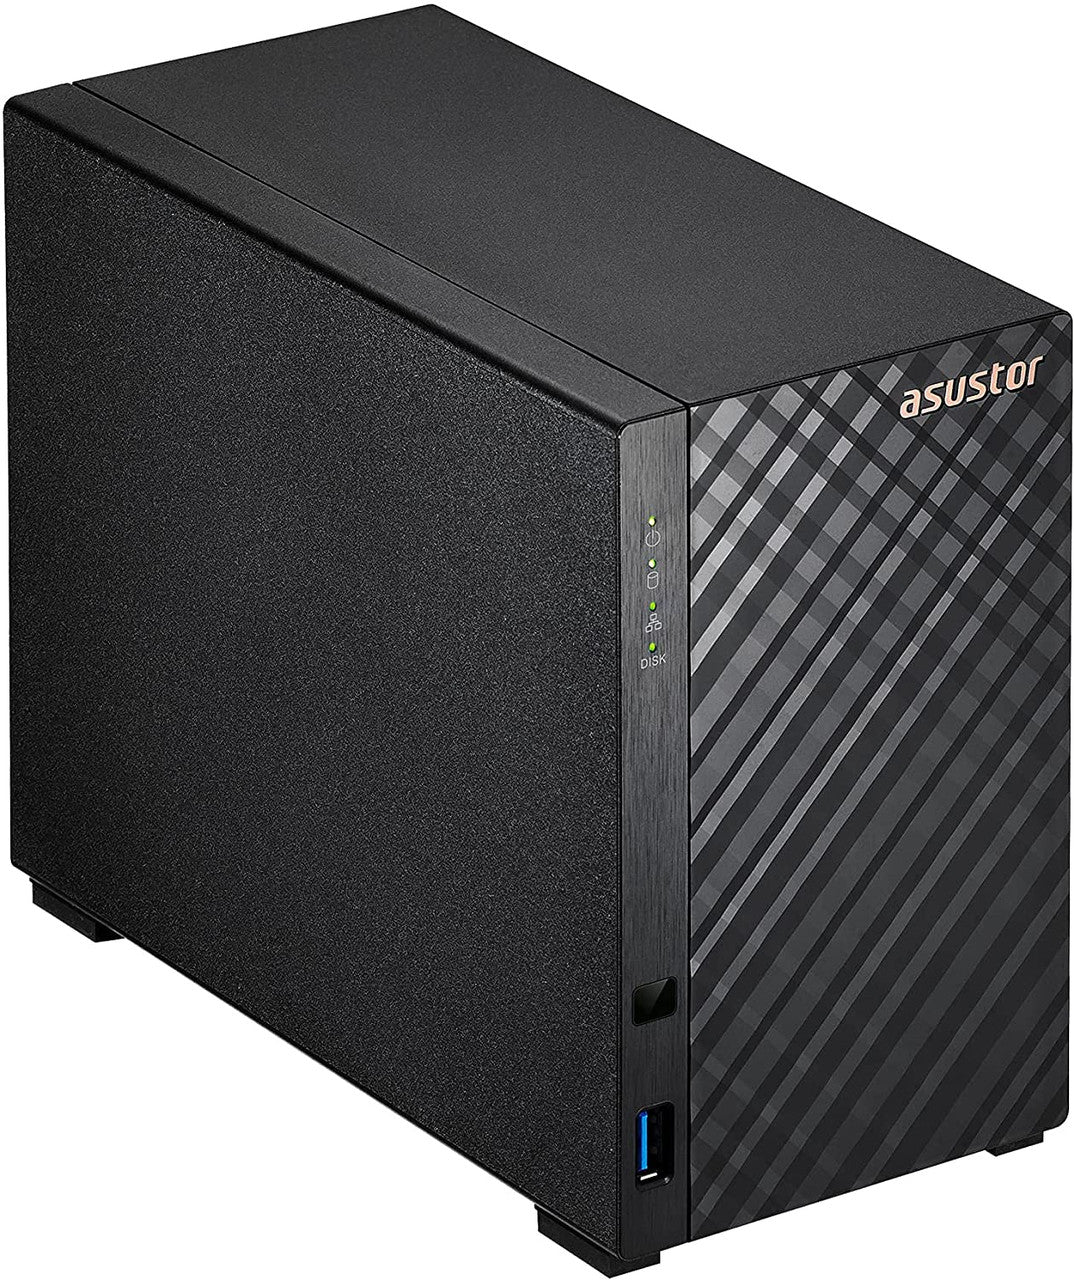 Asustor AS1102T 2-Bay Drivestor 2 NAS with 1GB RAM and 6TB (2x3TB) Western Digital RED Plus Drives